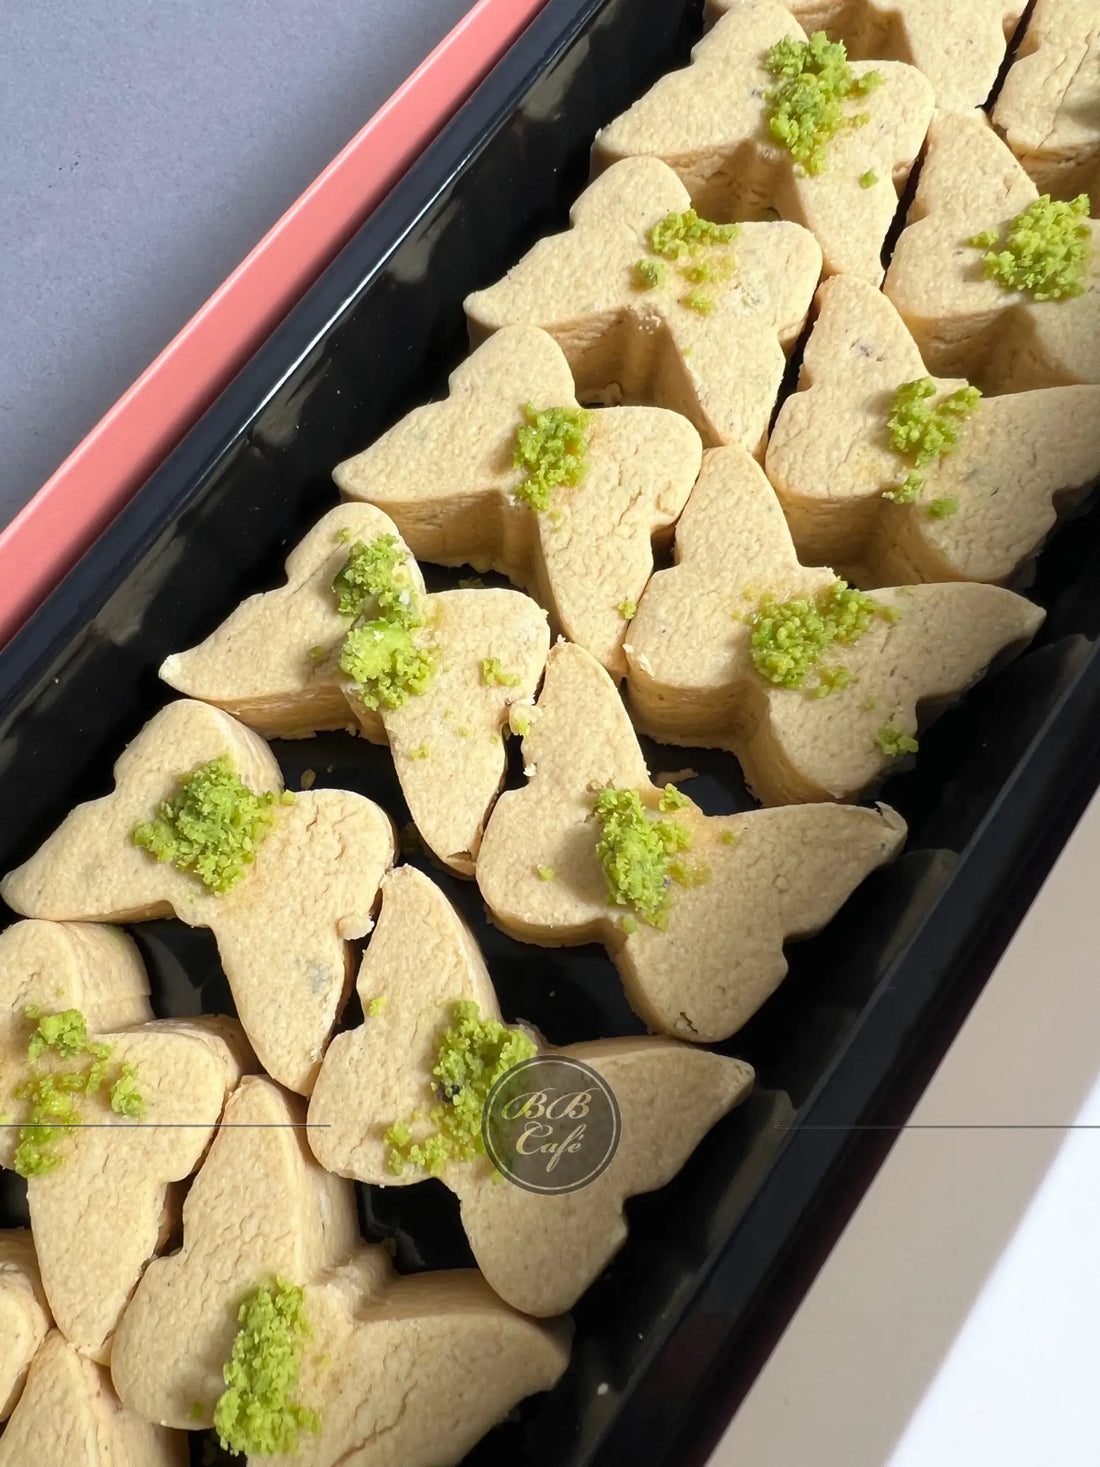 Norouz butterfly chickpea cookies in pink box - شیرینی نخودچی پروانه pastry